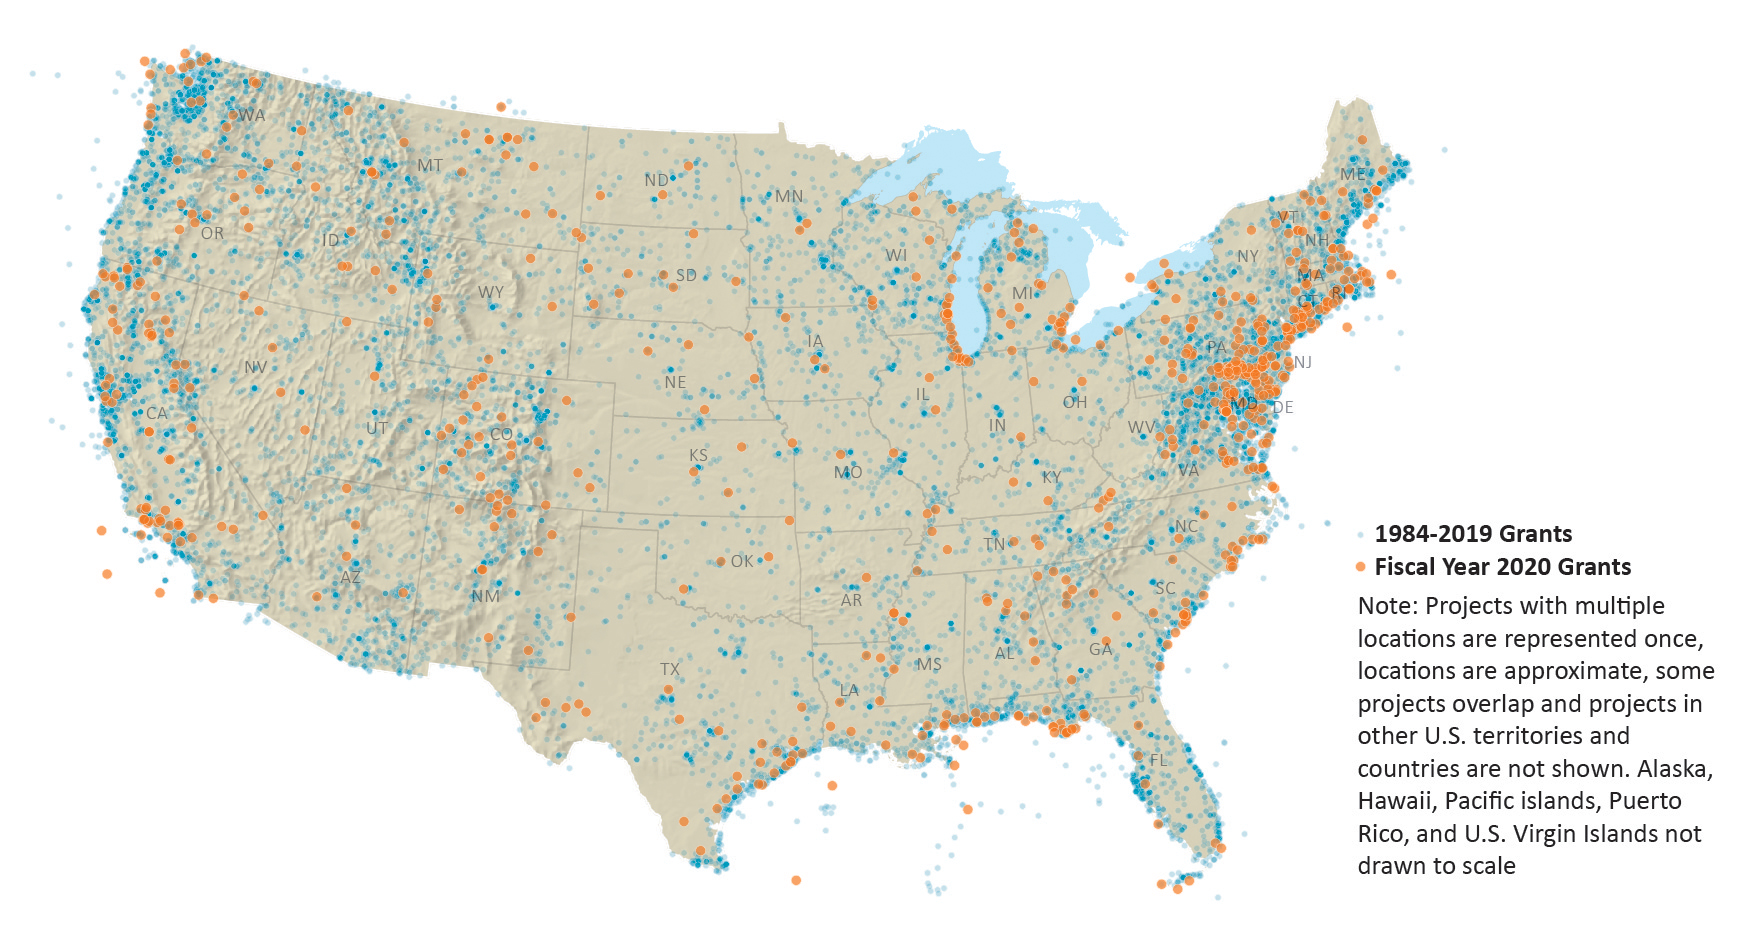 Annual Report map of U.S. projects